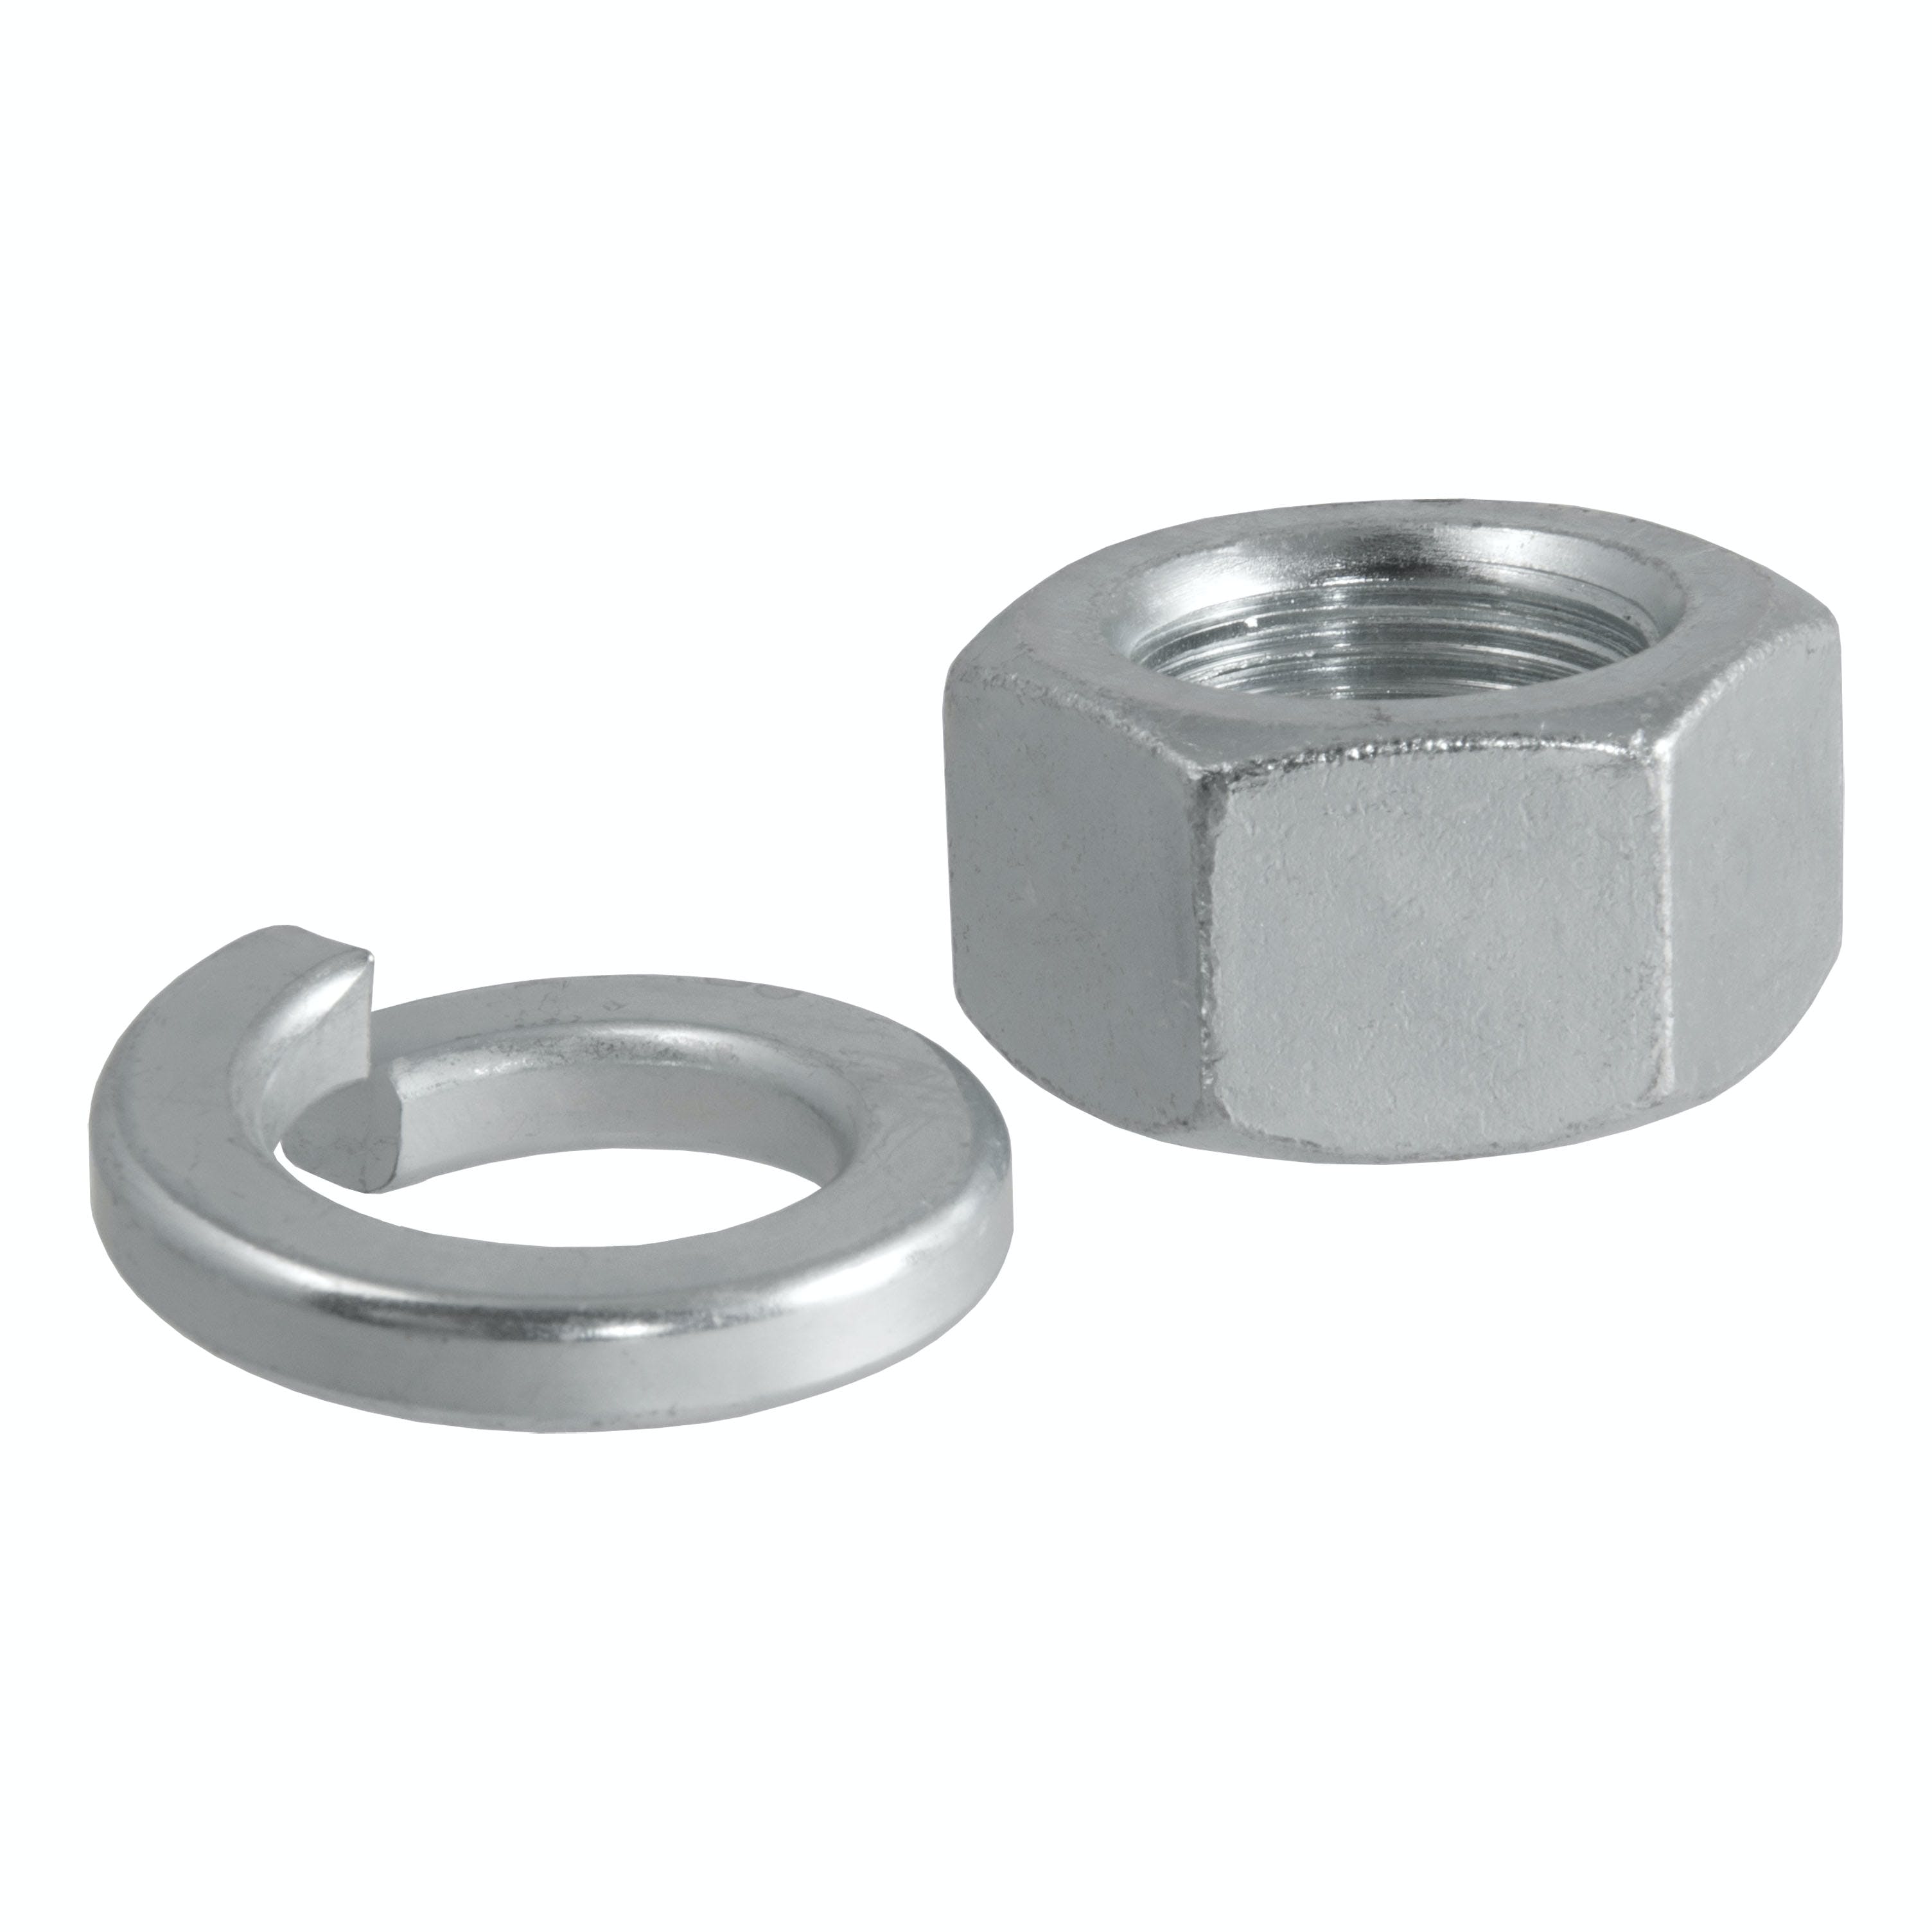 CURT 40105 Replacement Trailer Ball Nut and Washer for 1-1/4 Shank